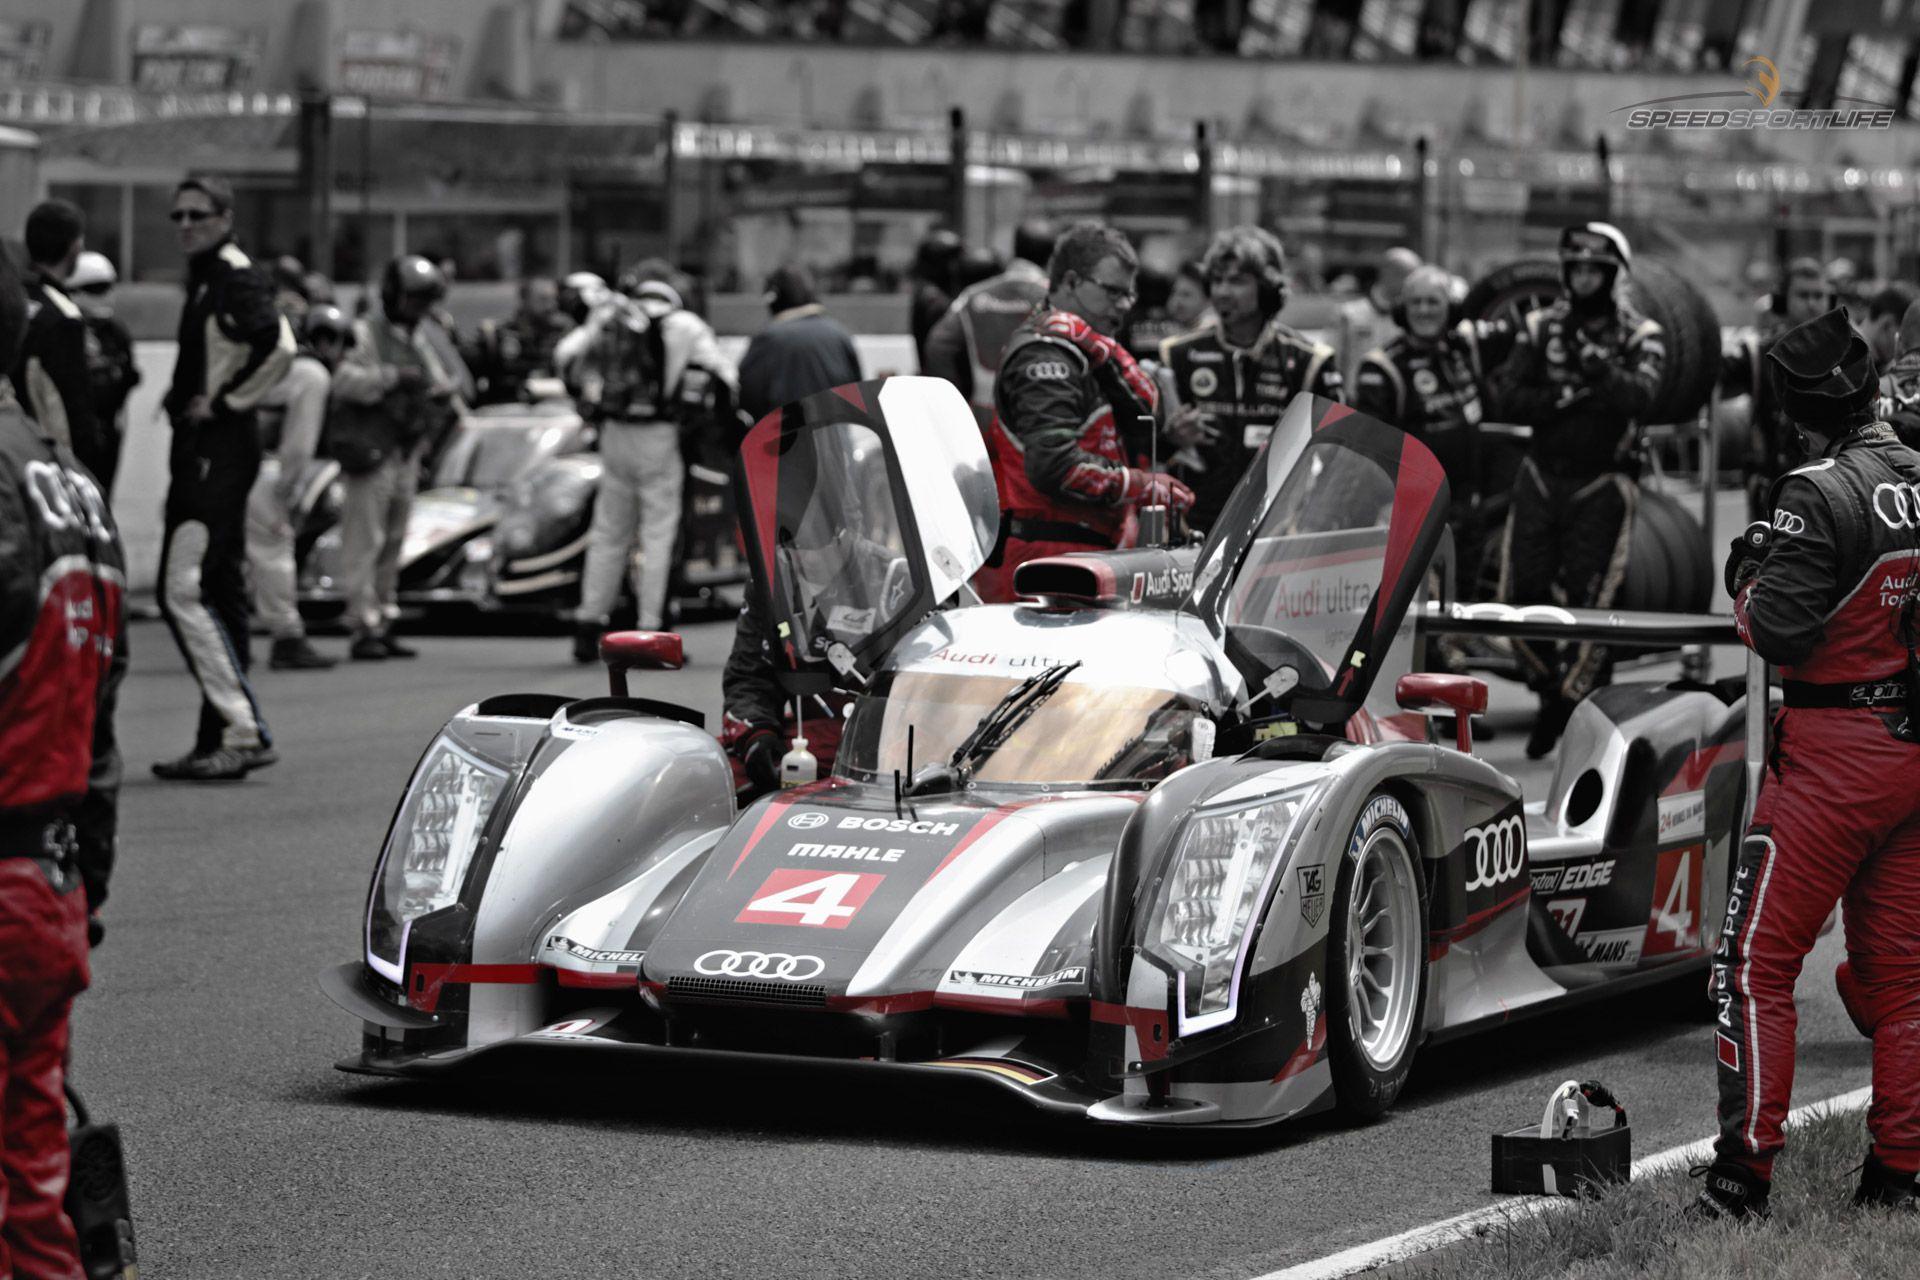 S:S:L Wallpaper: On the Grid at Le Mans:Sport:Life